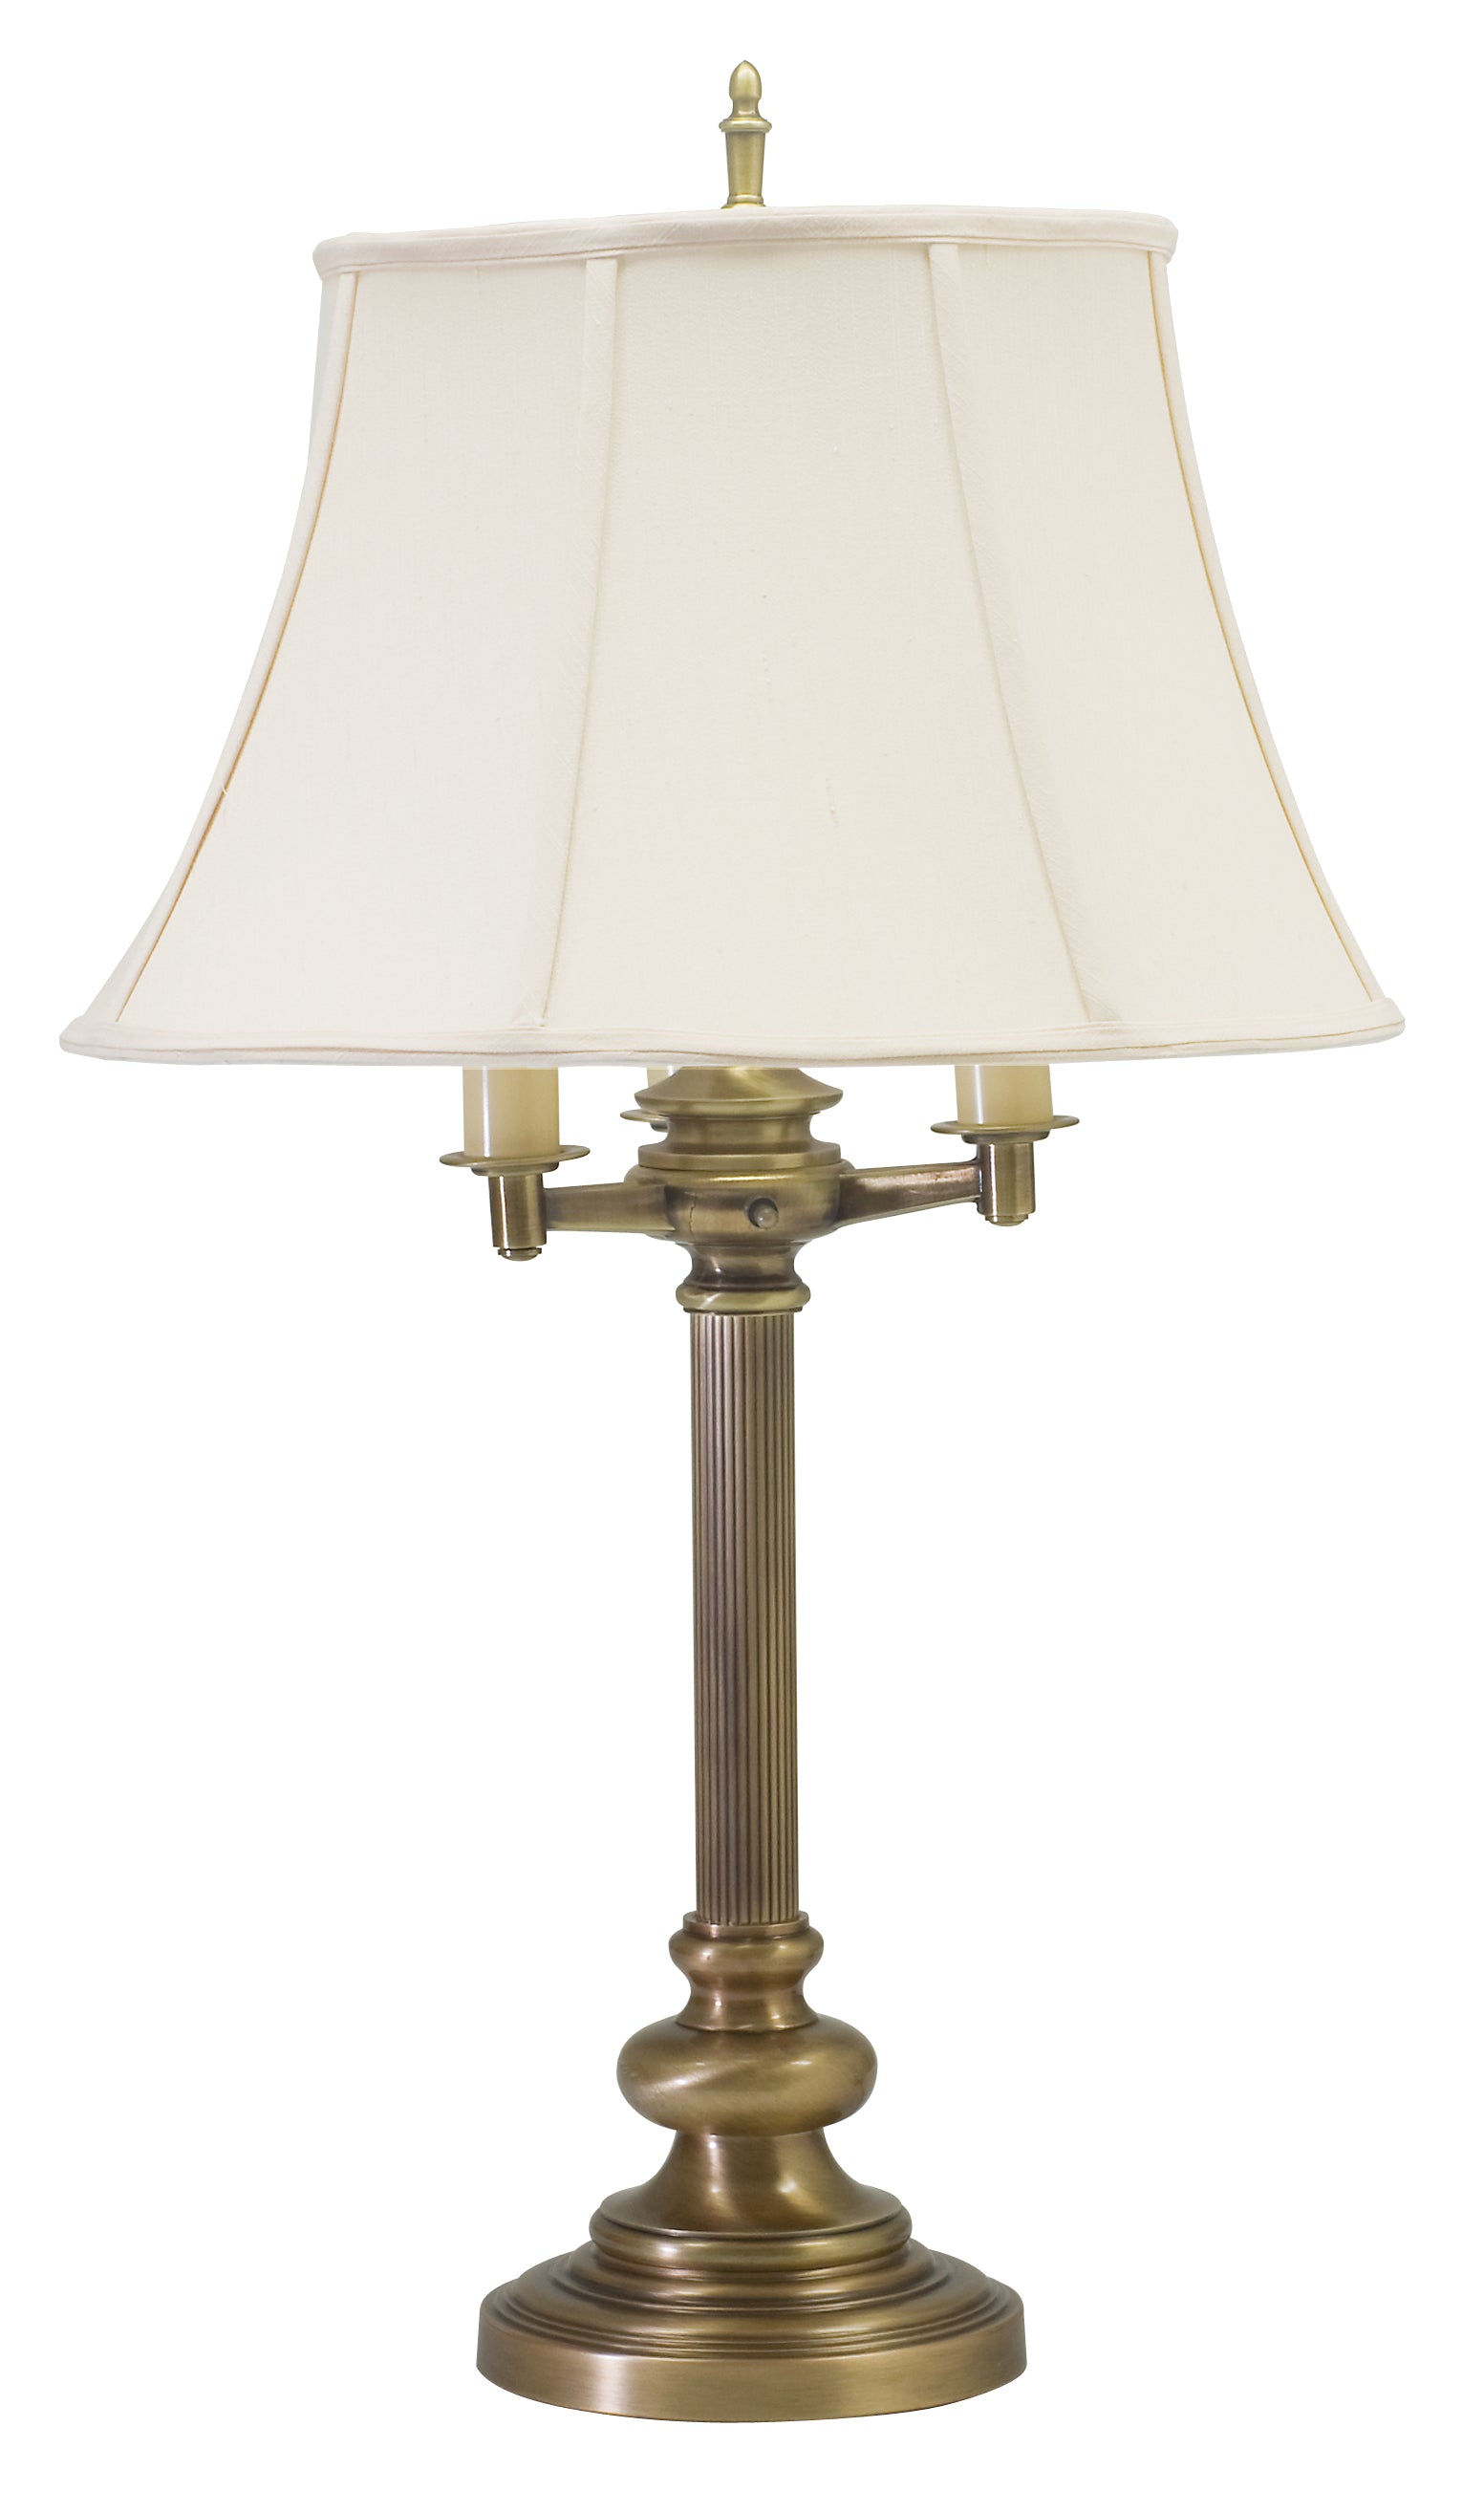 House of Troy Newport 30" Antique Brass 6-Way Table Lamp N650-AB